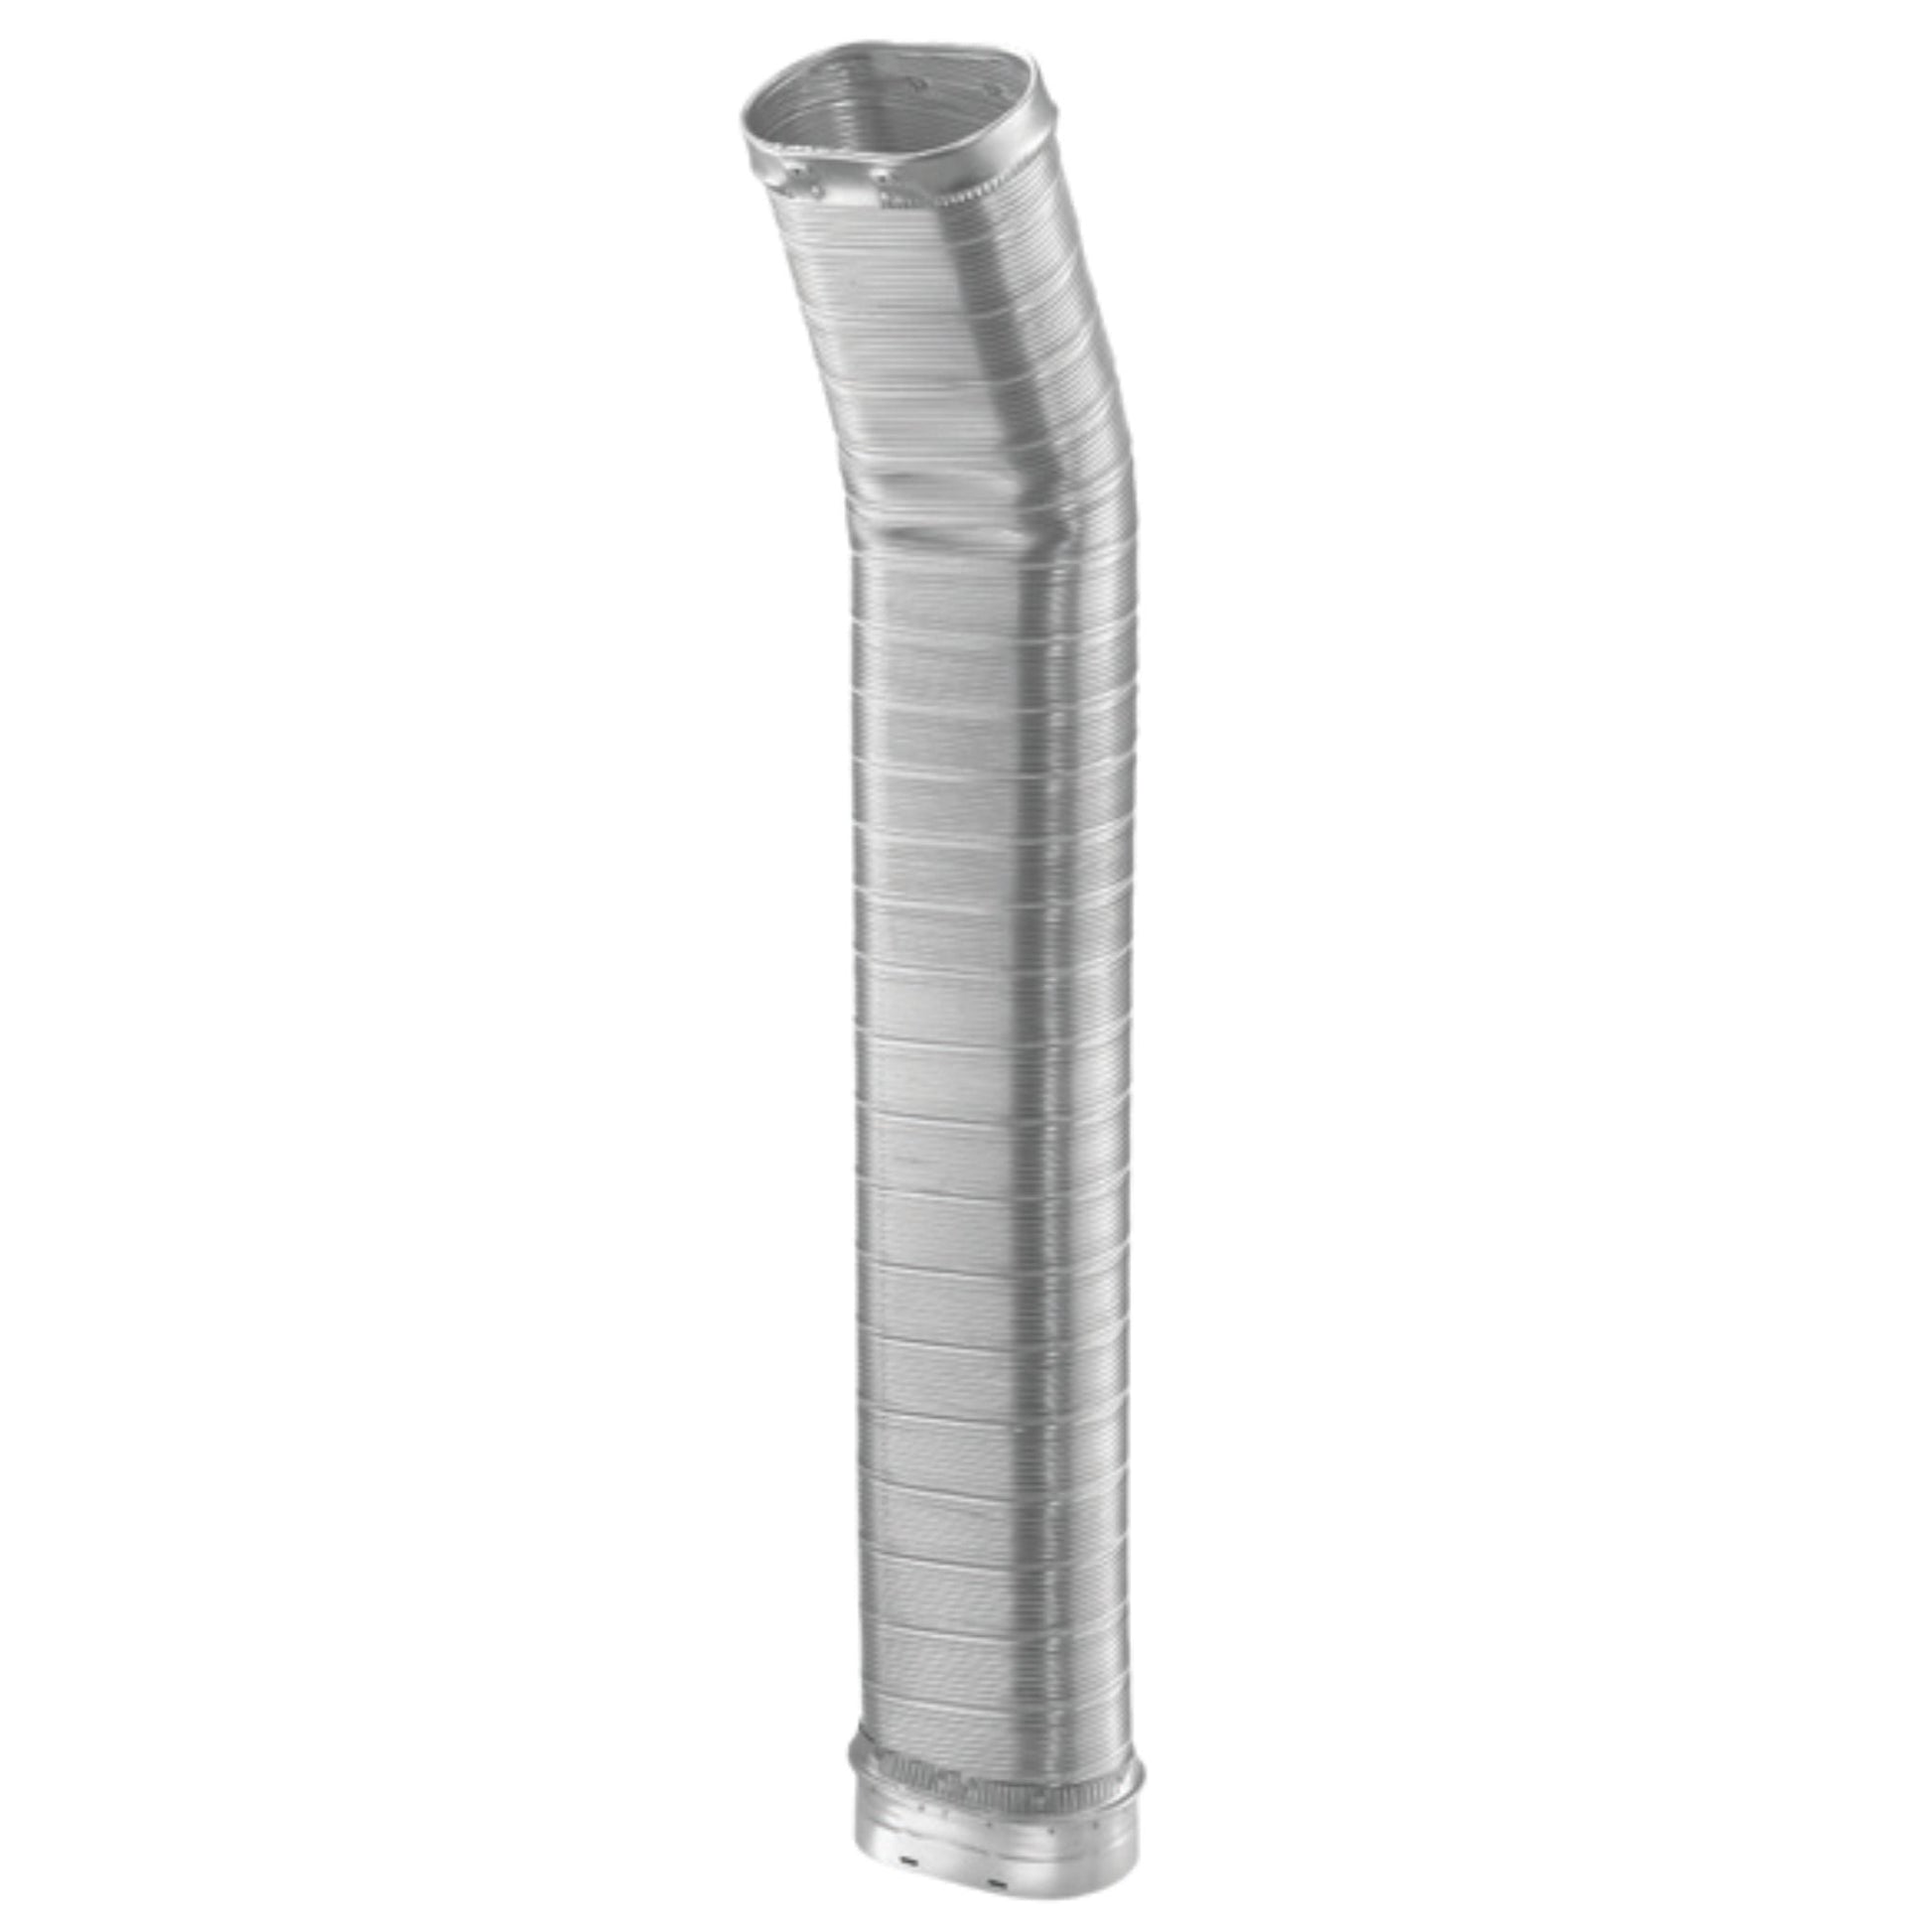 DuraVent DuraLiner 6" x 36" Oval-To-Oval Stainless Steel Flex Pipe